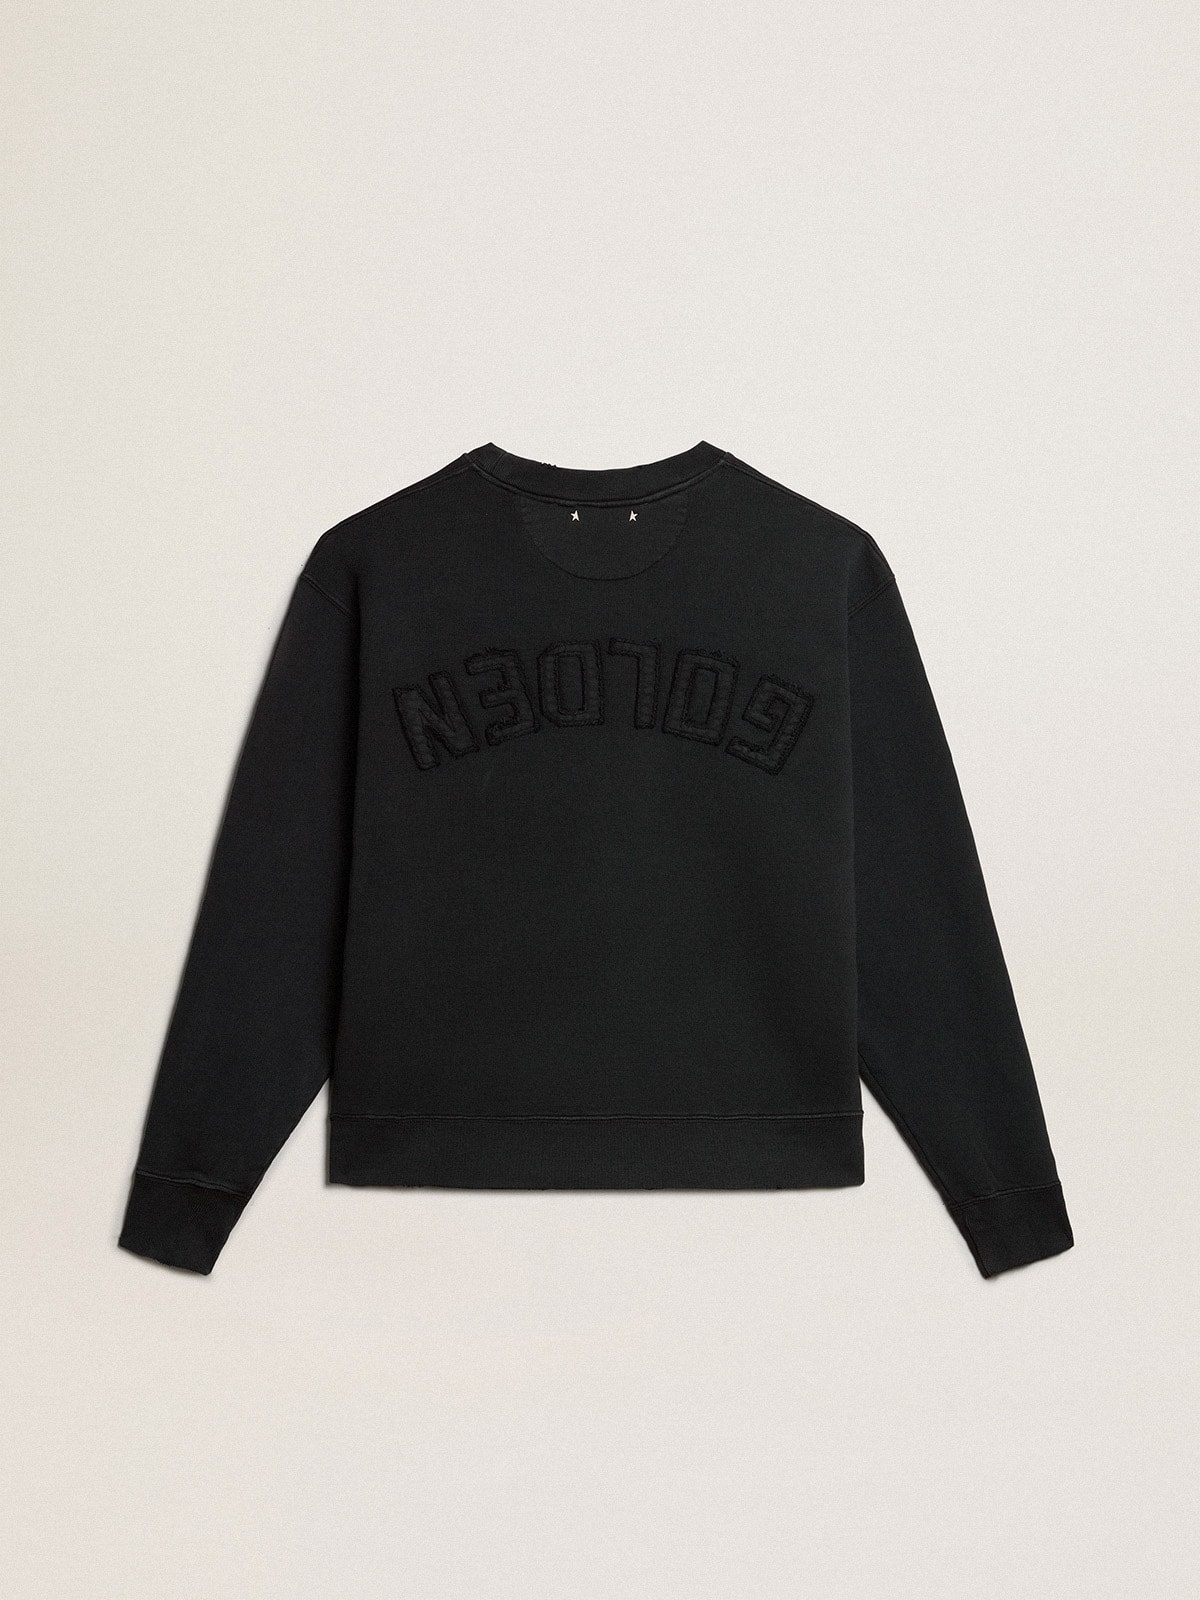 Sweatshirt in washed black with reverse logo on the back - Asian fit - 6